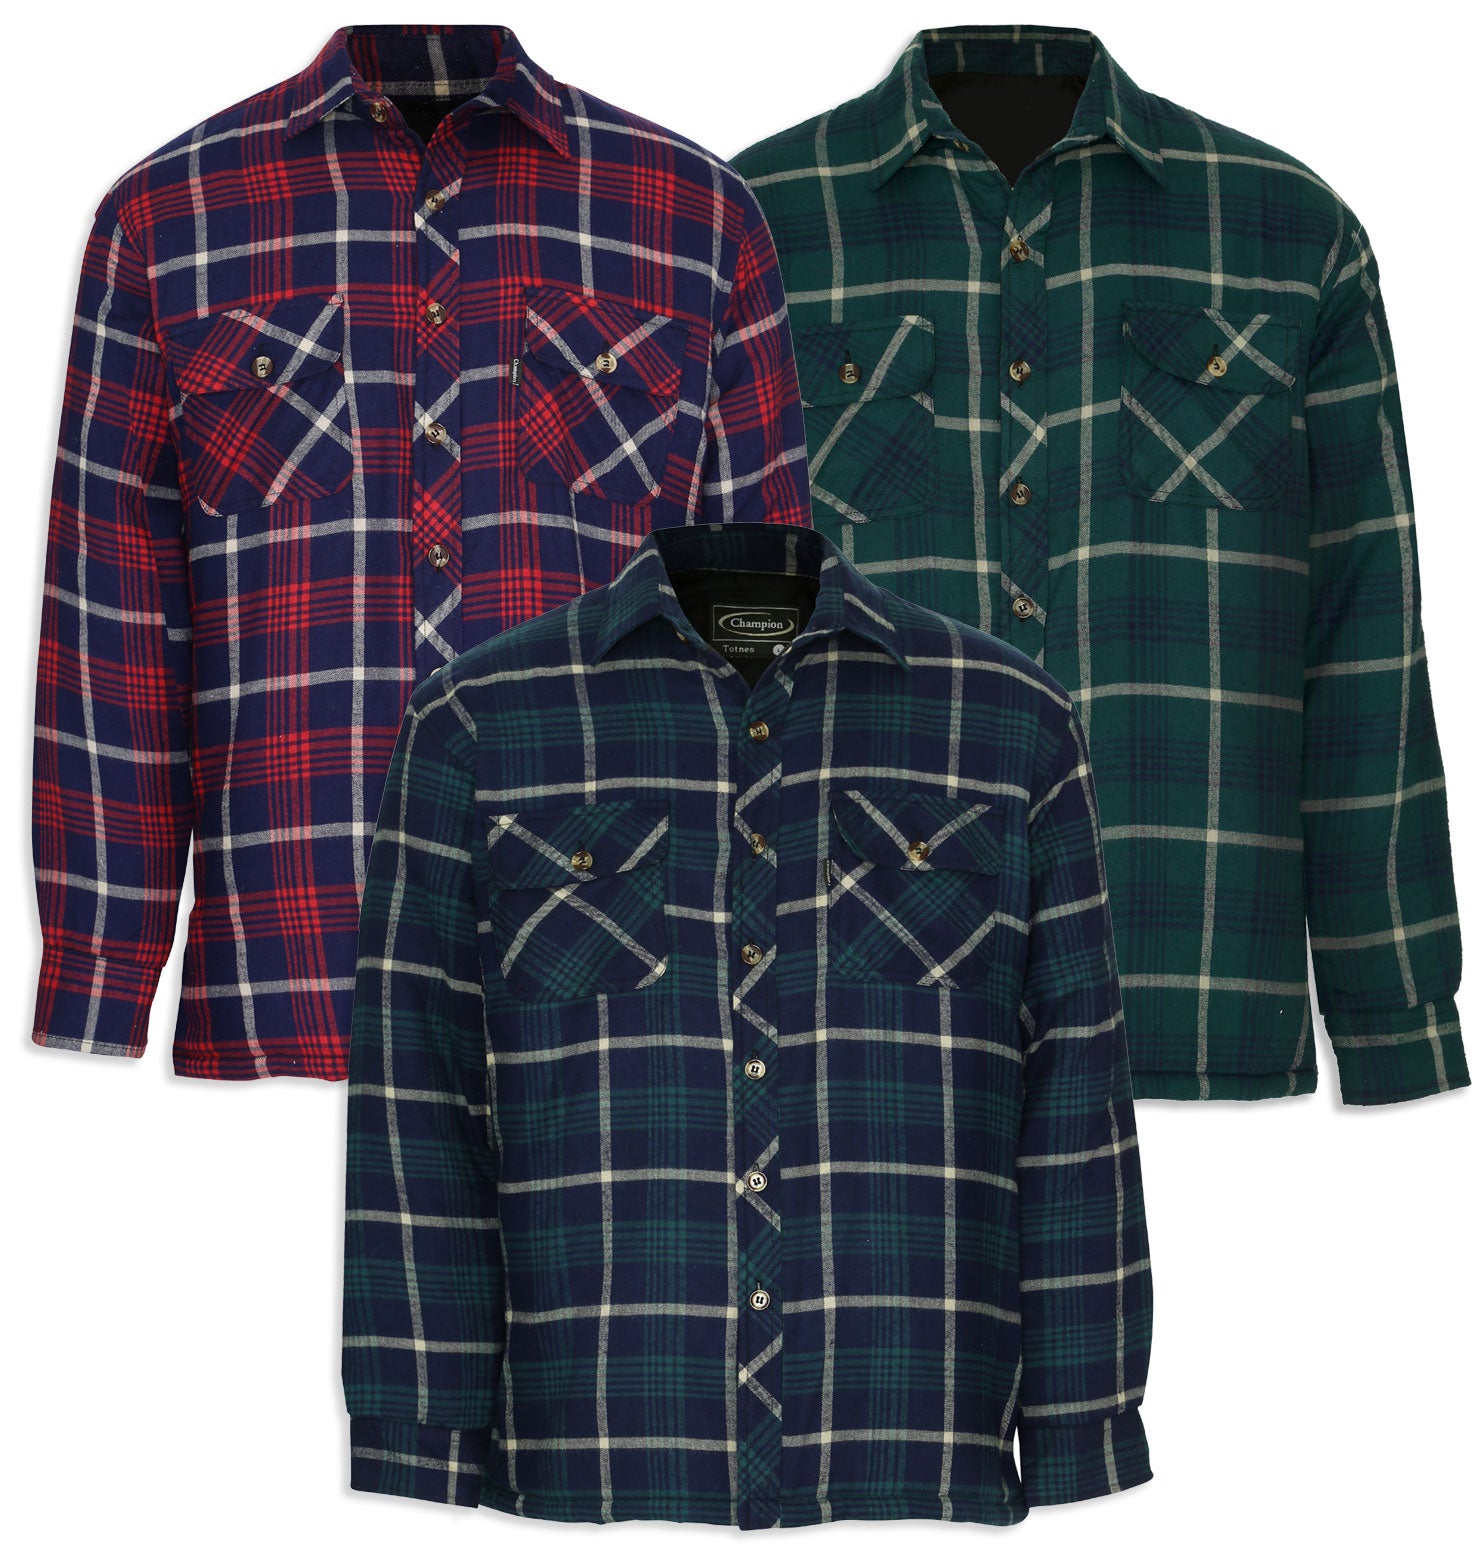 Padded Quilted Shirt Champion Red - Bennevis Clothing